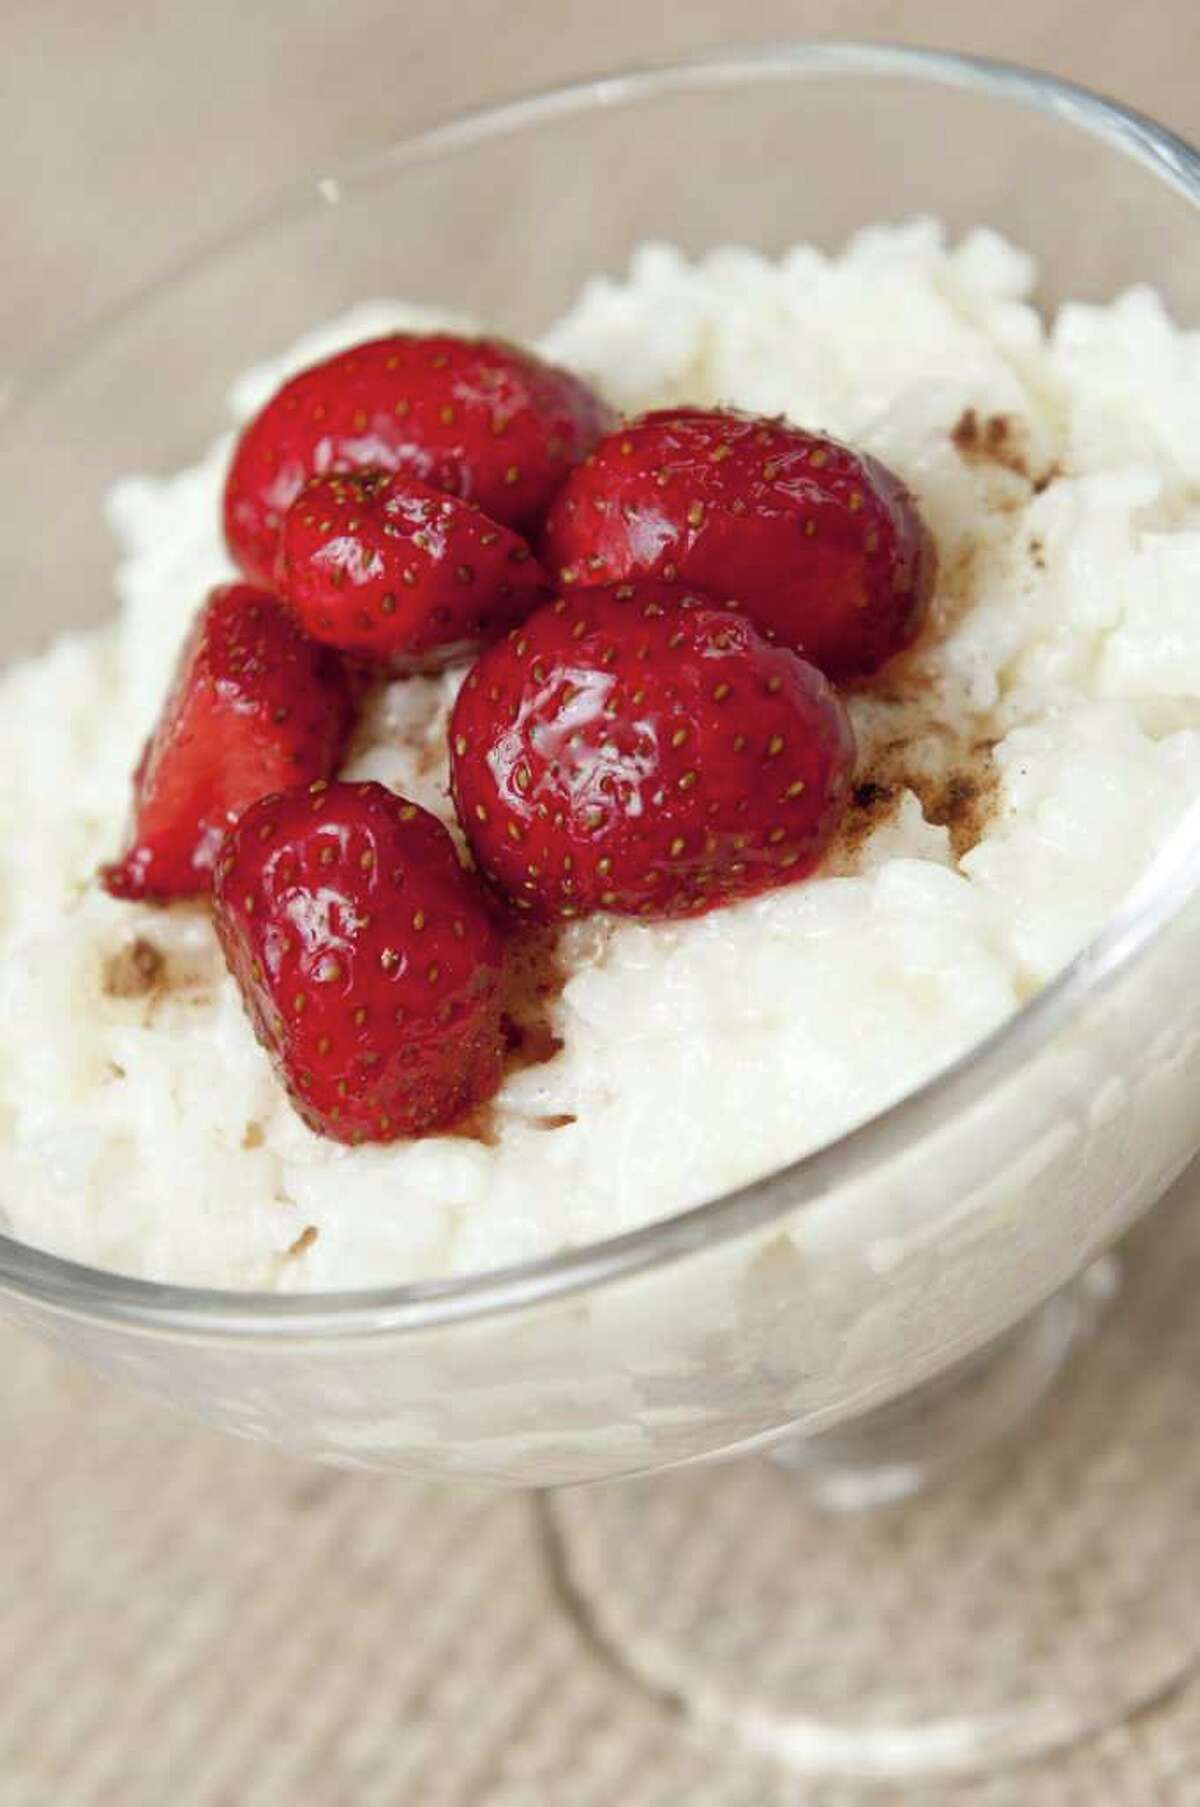 Rice pudding with strawberries (NilsZ / Fotolia)